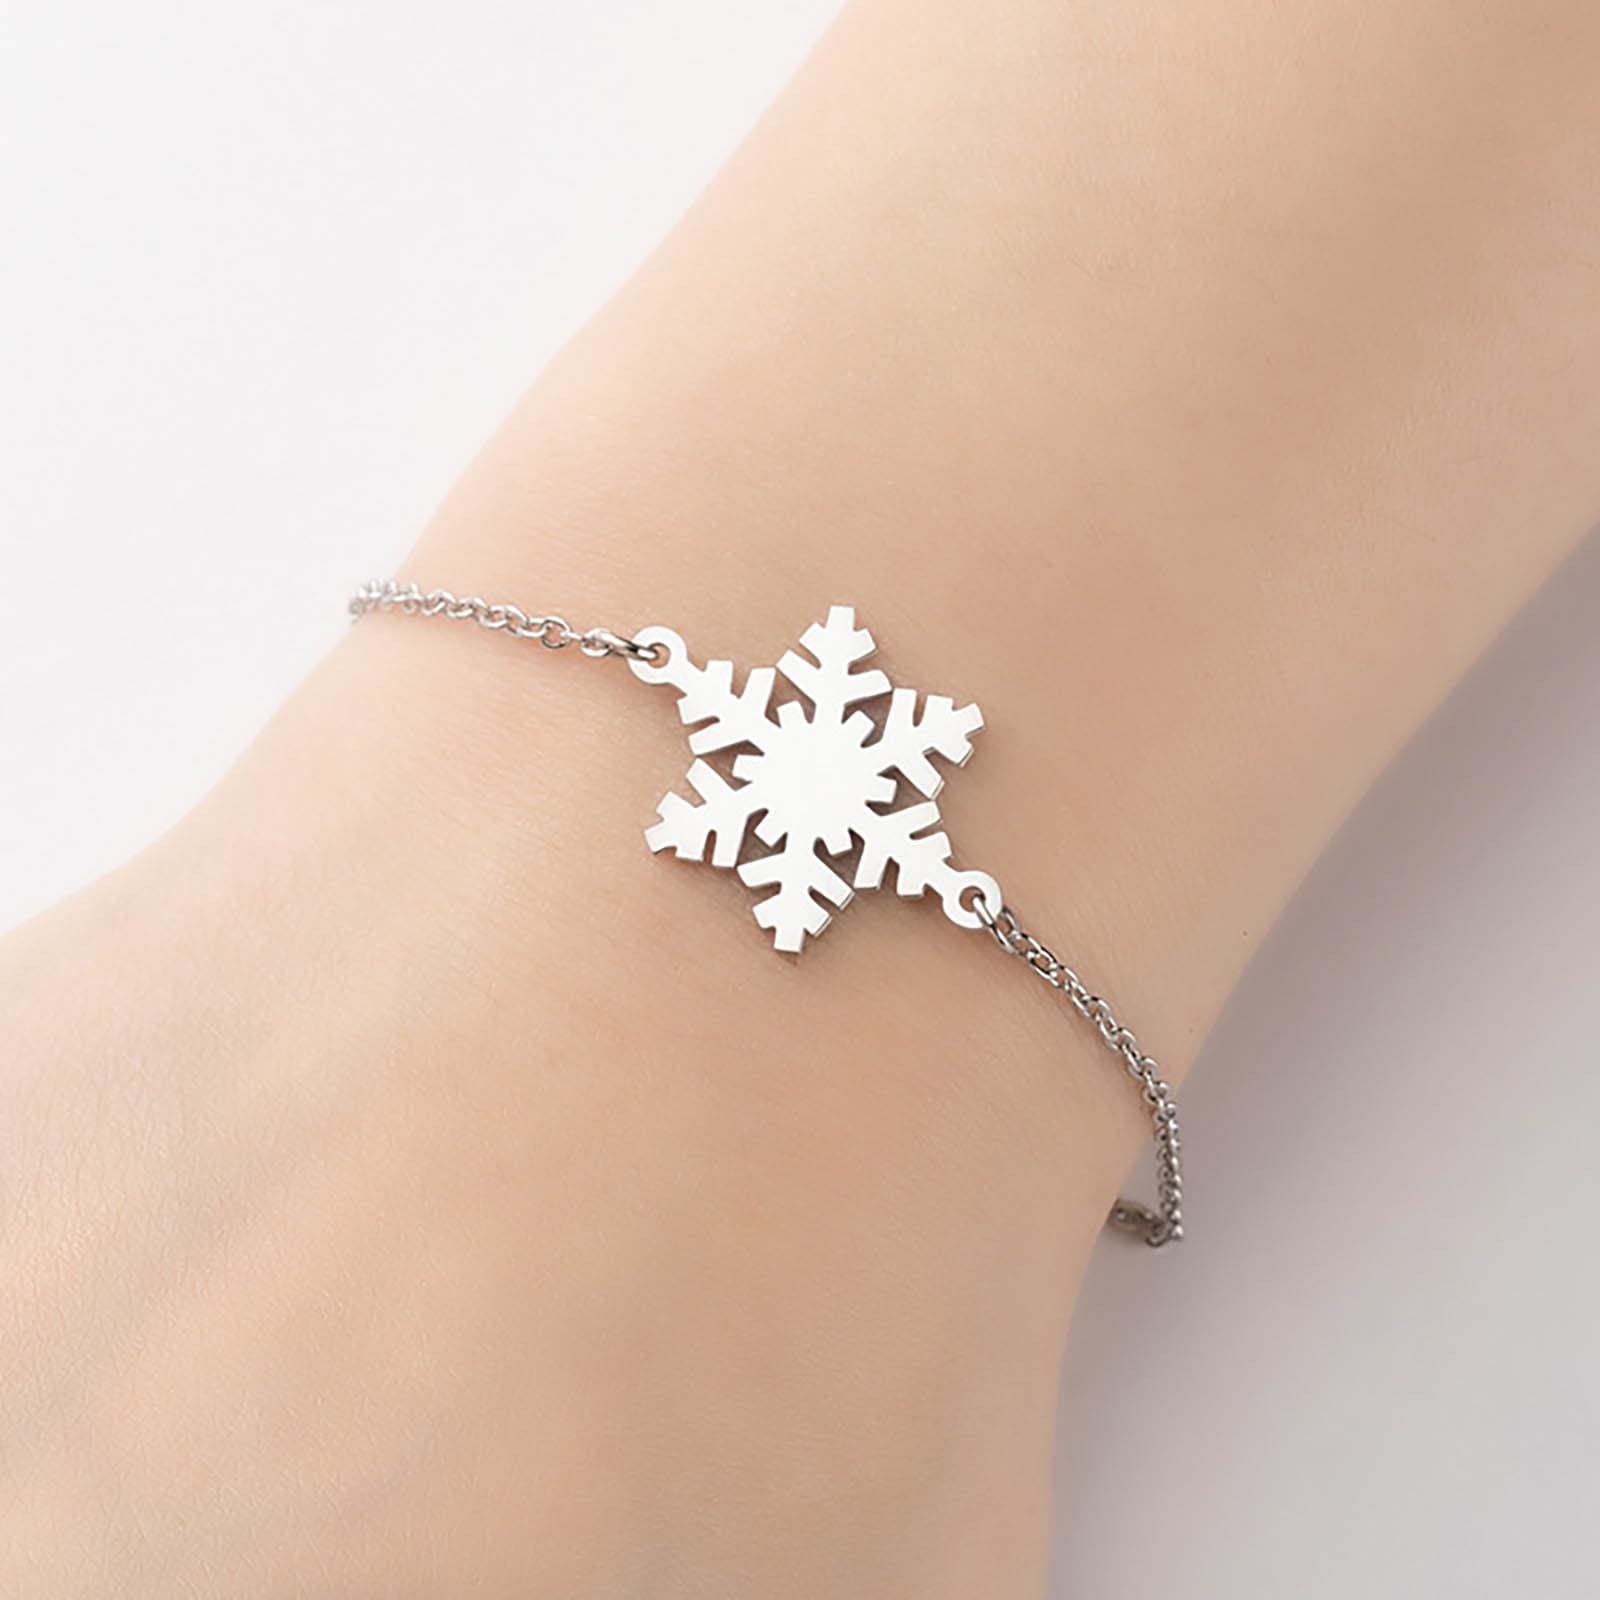 Amazon.com: Women's bracelet, snowflake bracelet, bracelet with silver snow  flake charm, green cord, valentine gift for her, winter jewelry, for sister  : Handmade Products